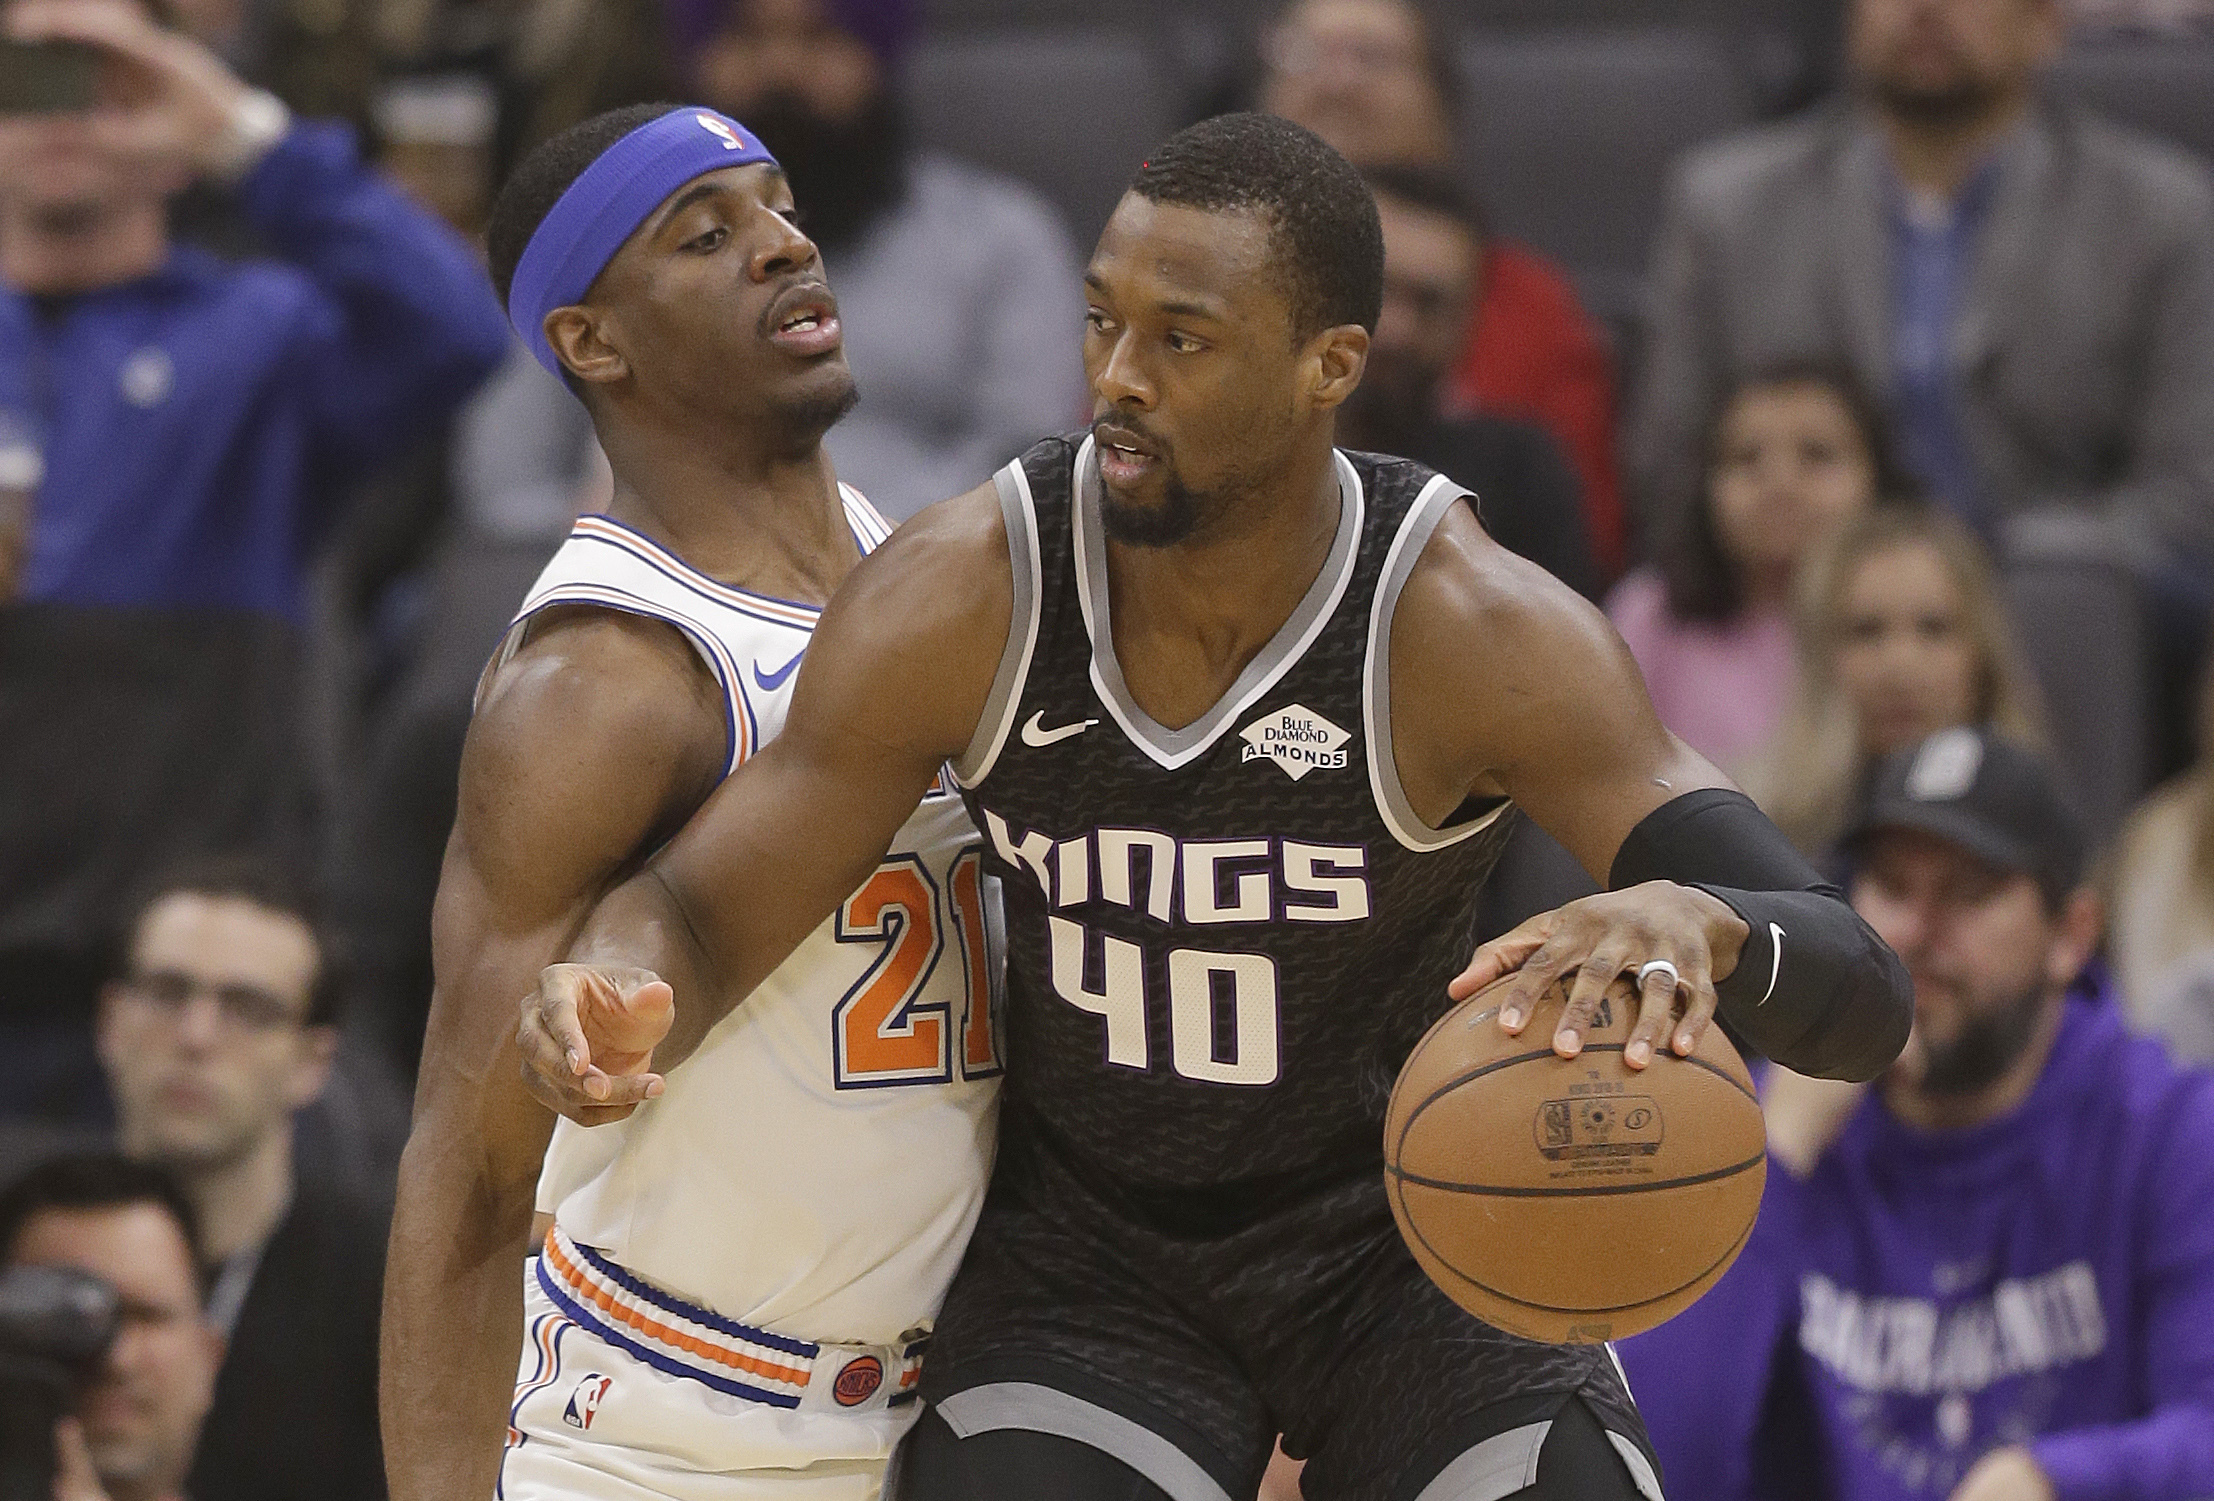 Barnes has best game with Kings in 115-108 win over Knicks